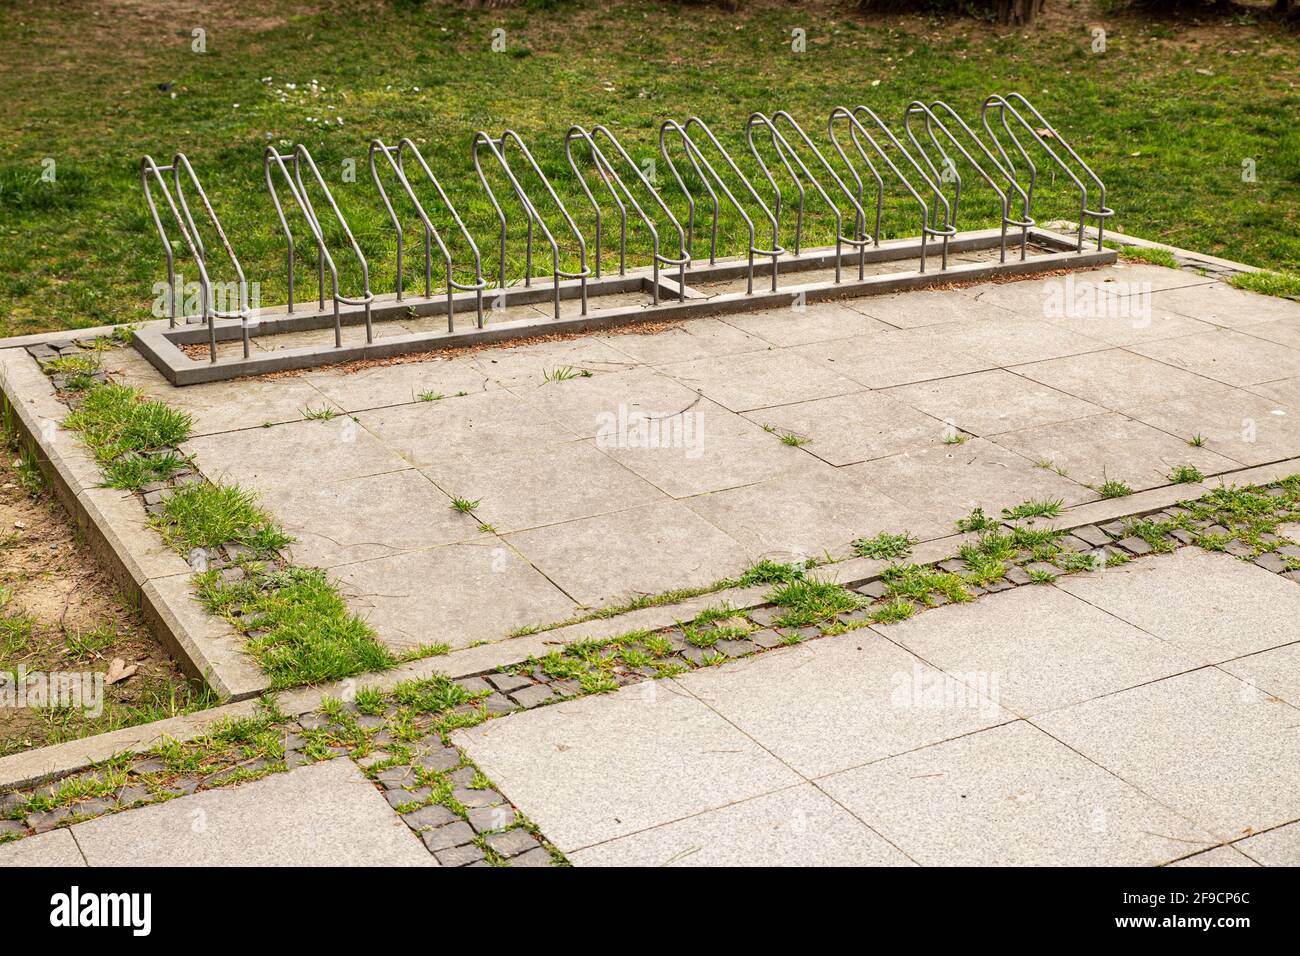 Empty bicycle park with steel slots on pavement next to green grass. Stock Photo